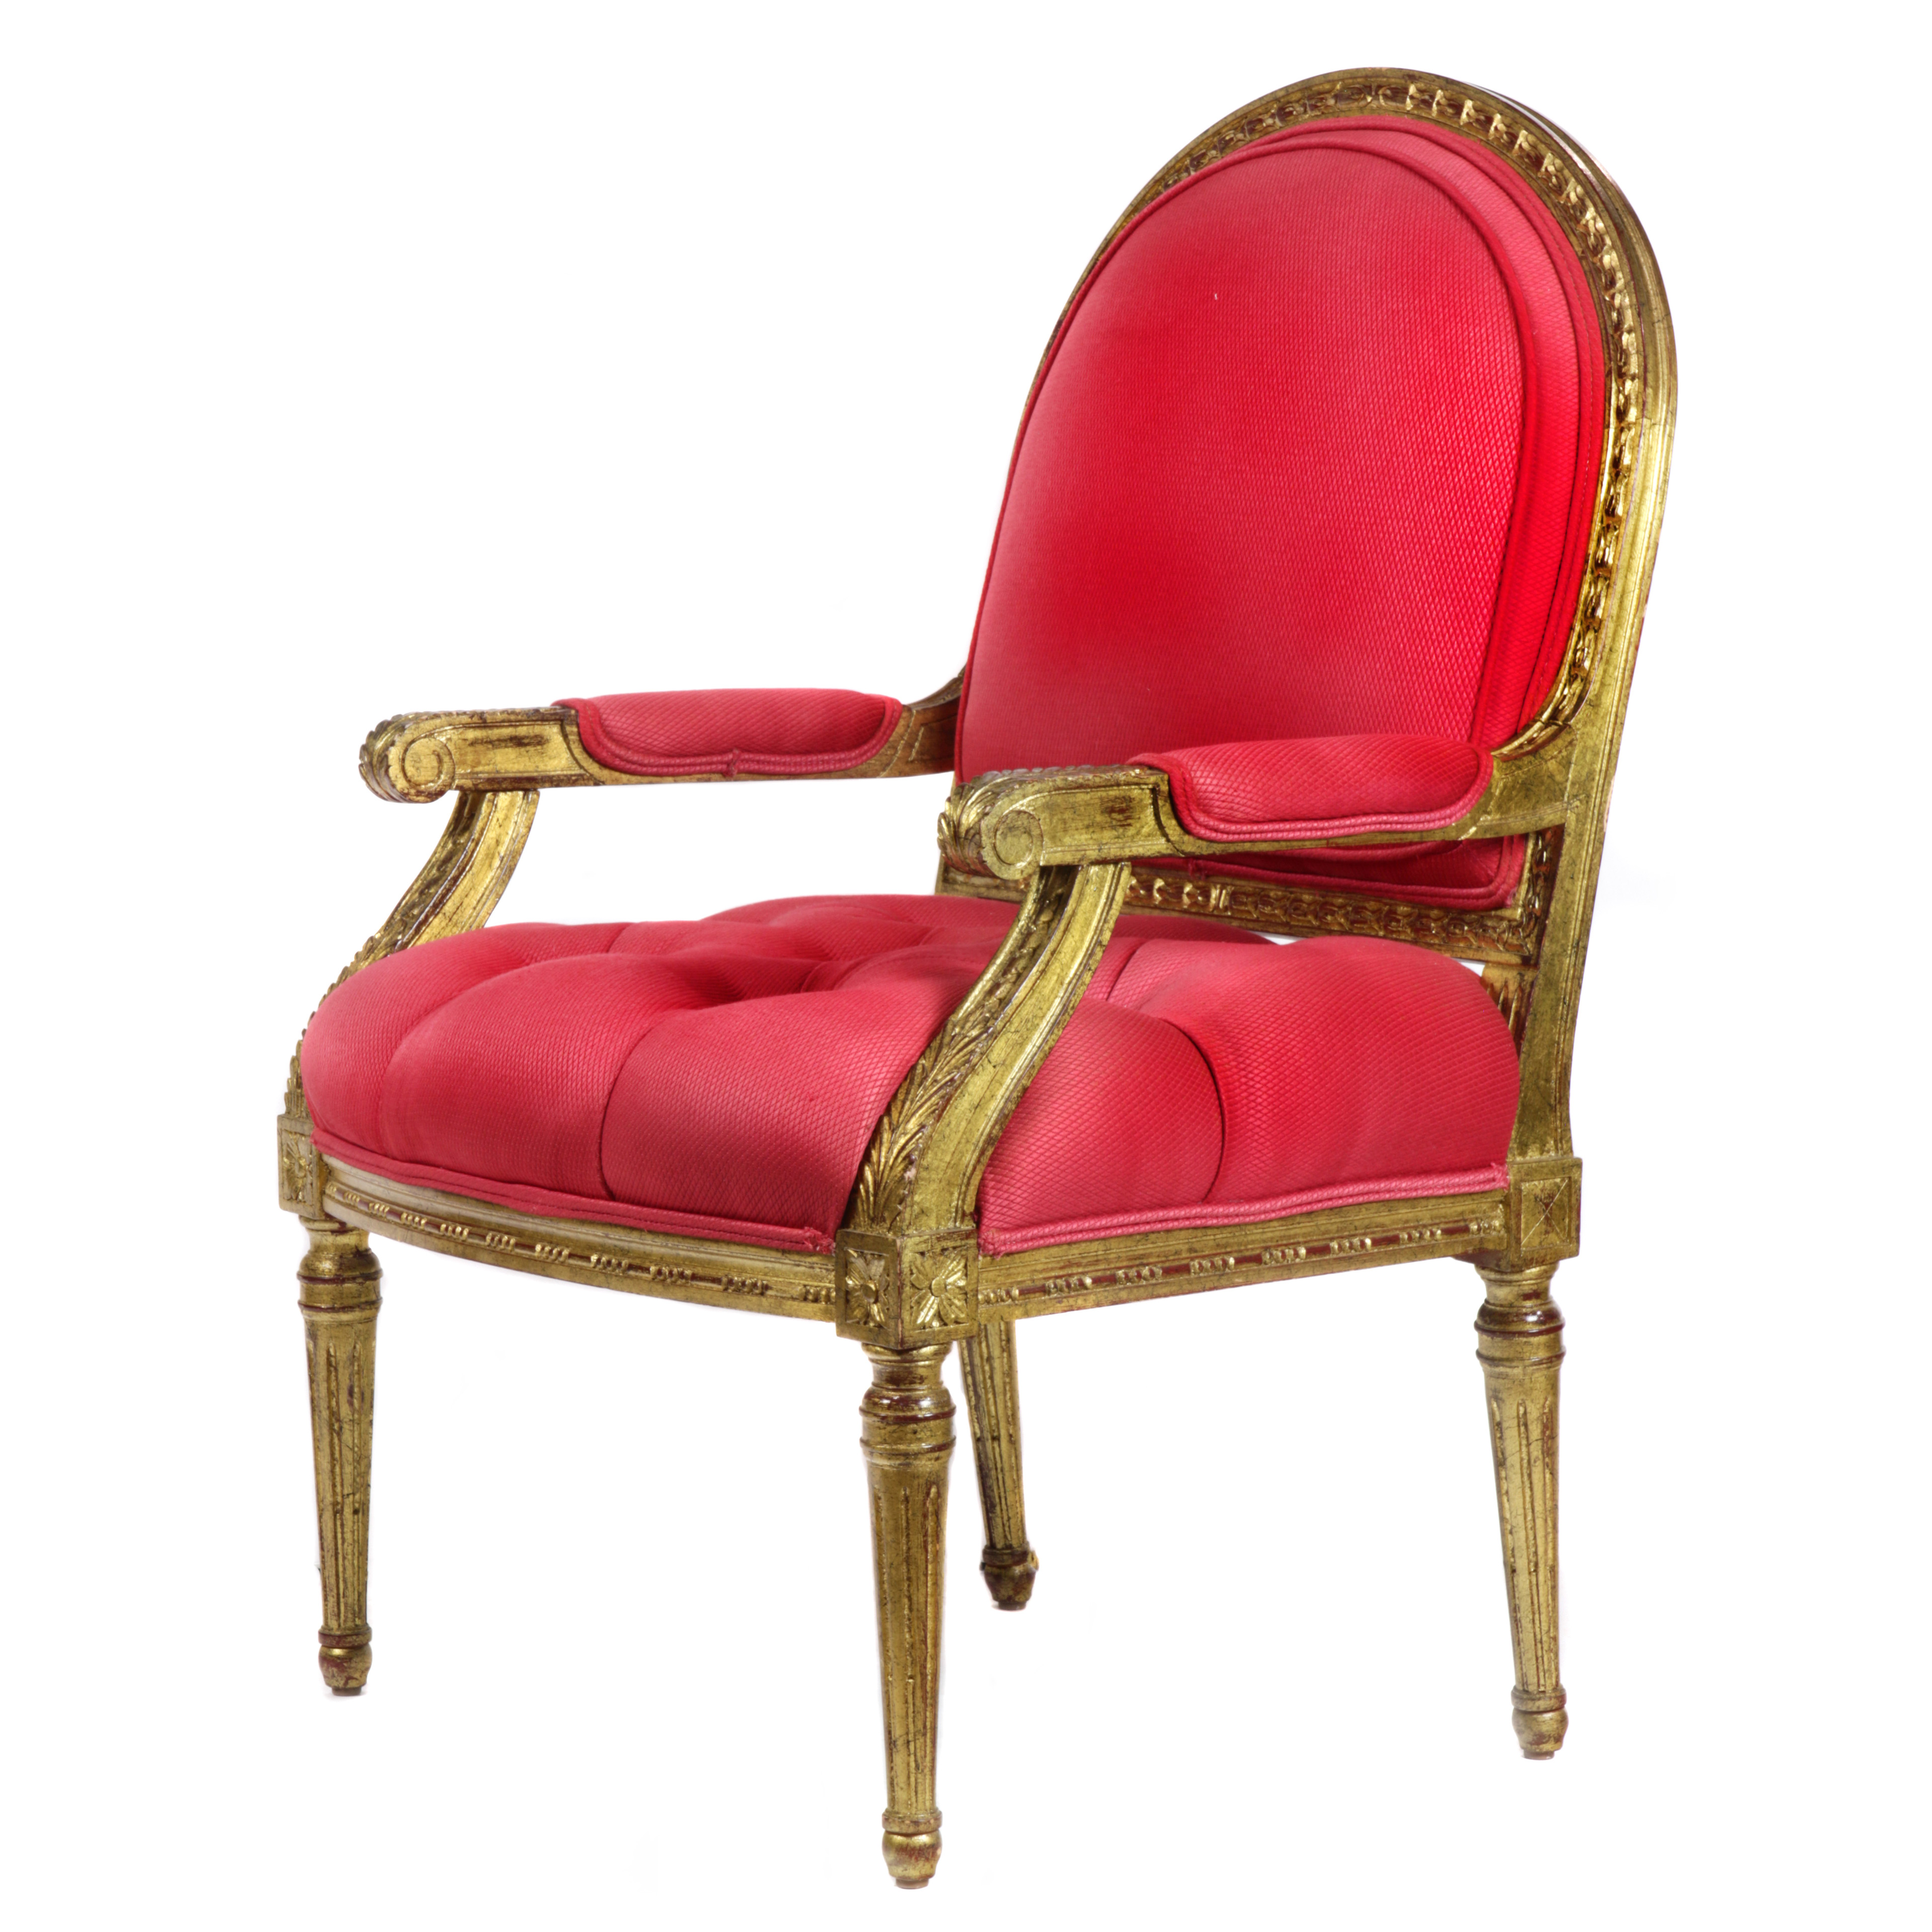 LOUIS XVI STYLE GILTWOOD FAUTEUIL  3a4cb2